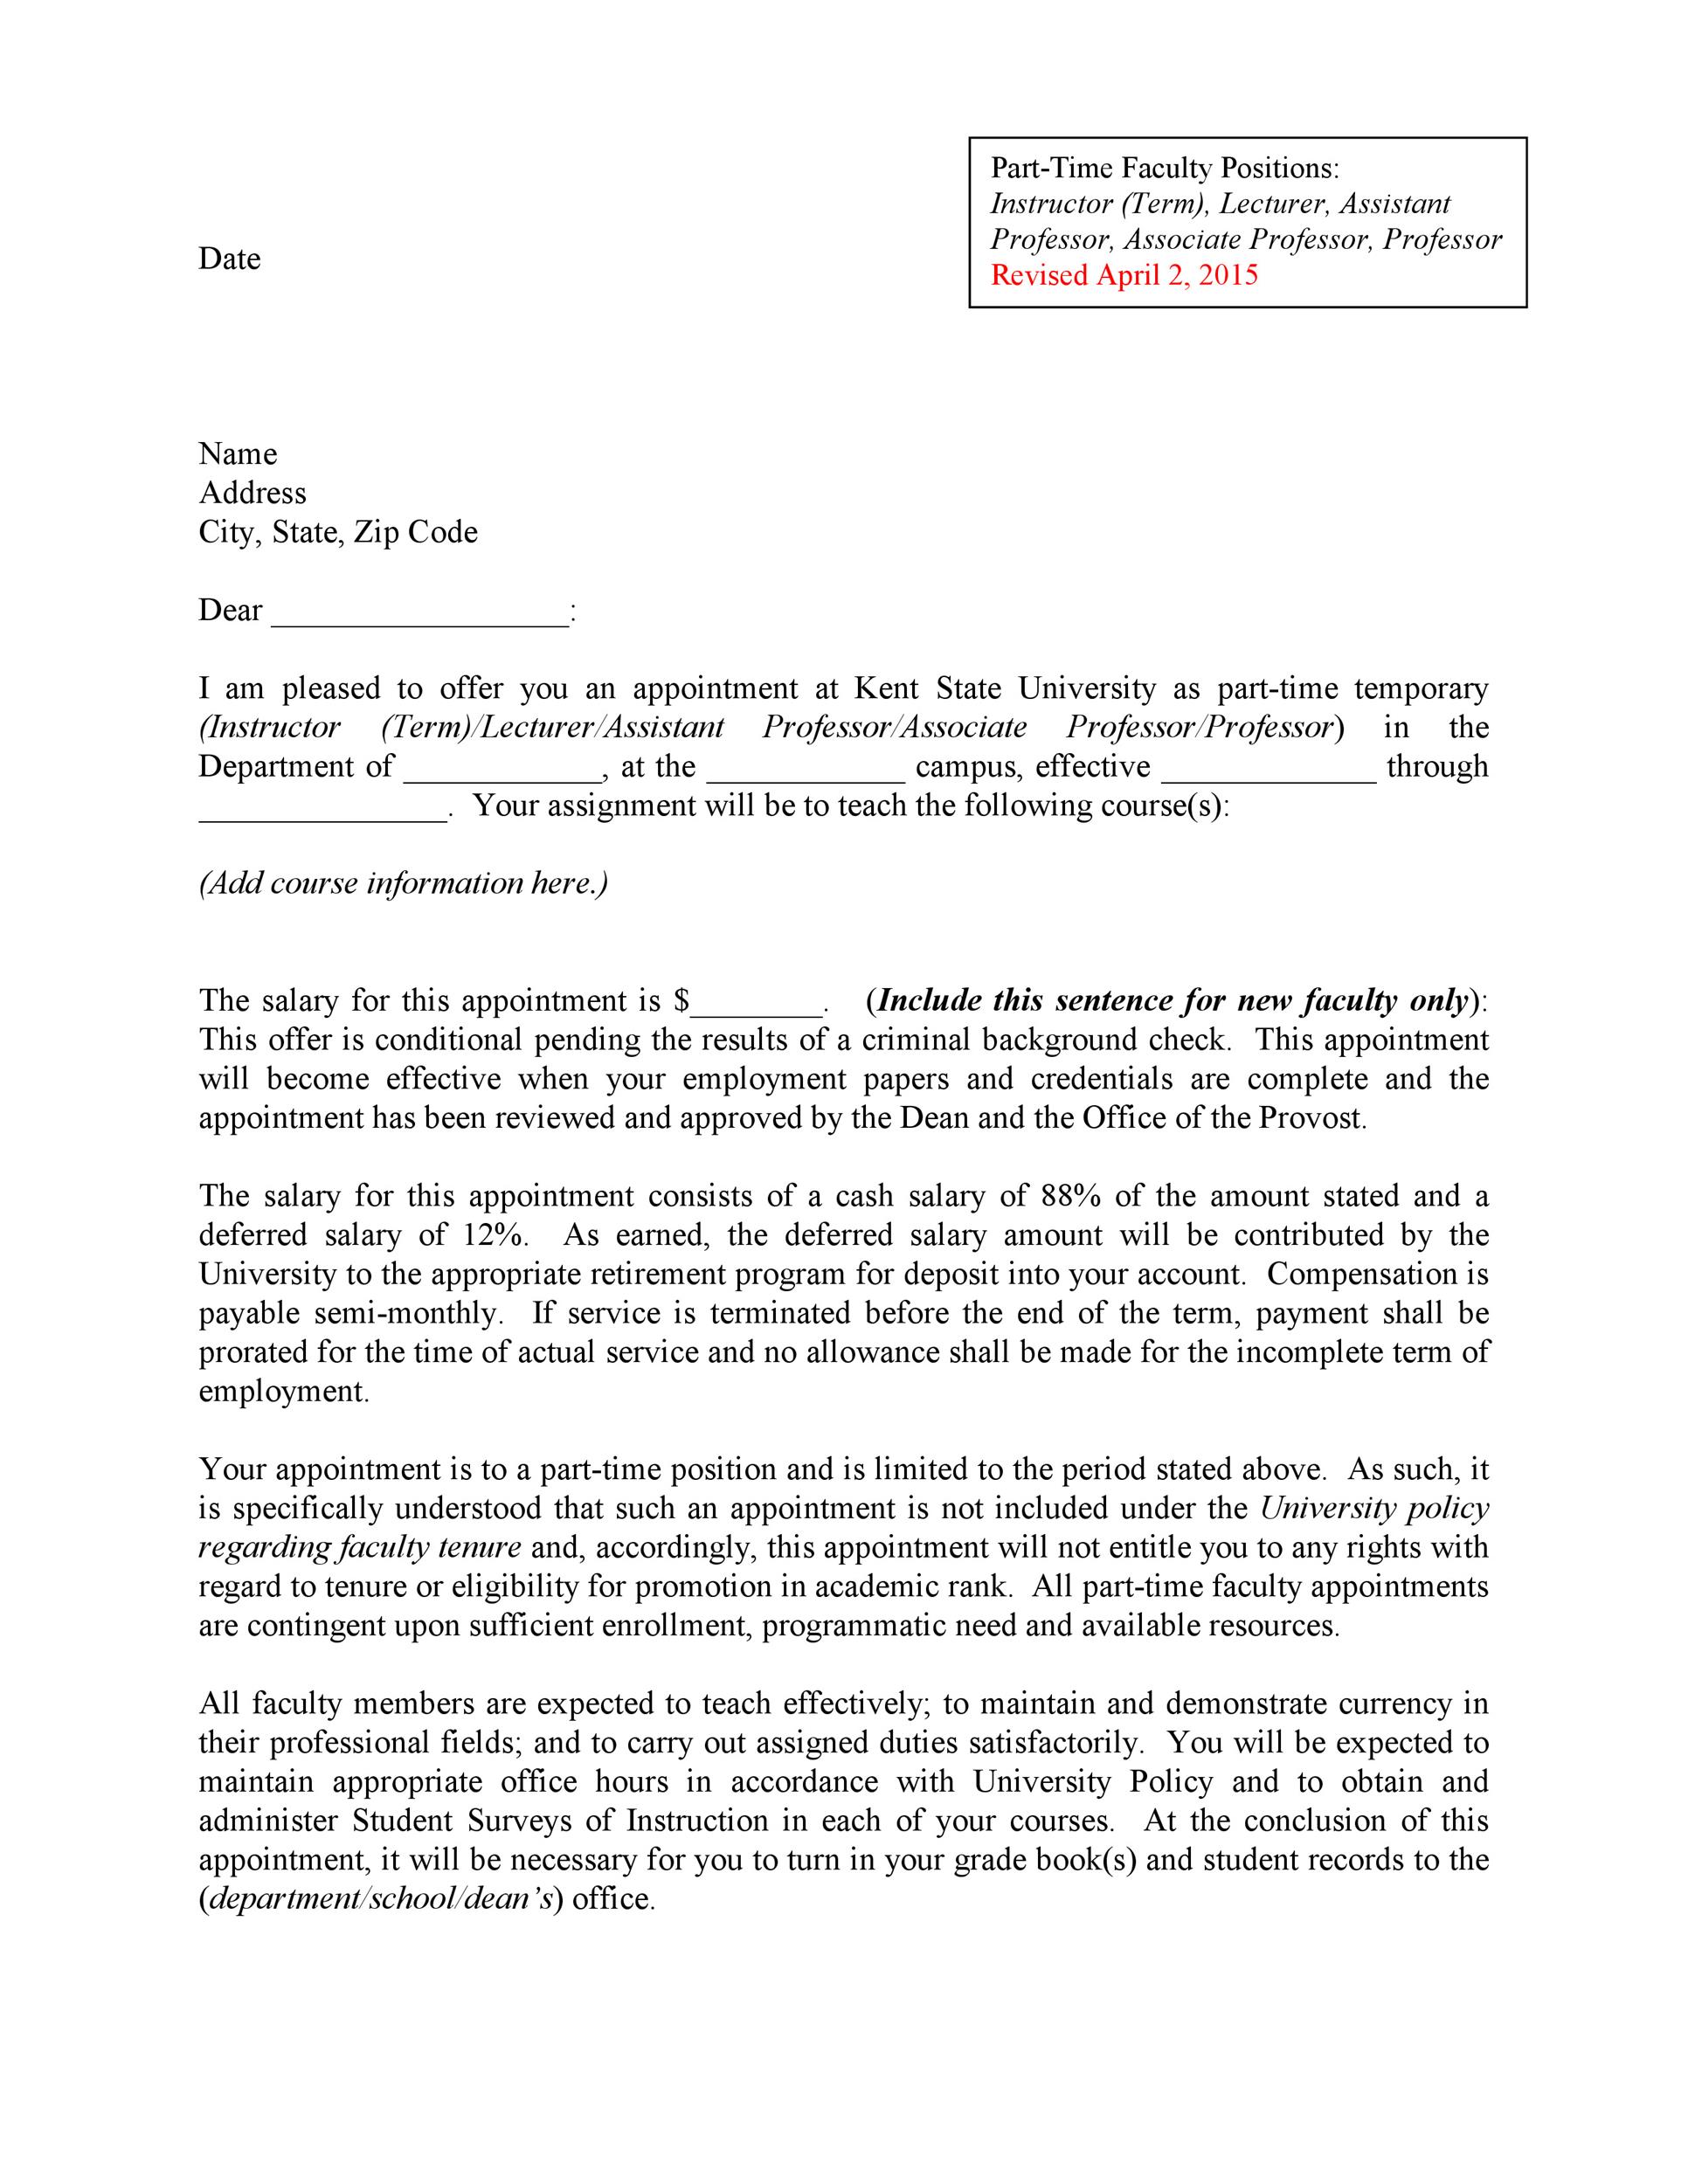 Conditional Offer Of Employment Letter Template from templatelab.com